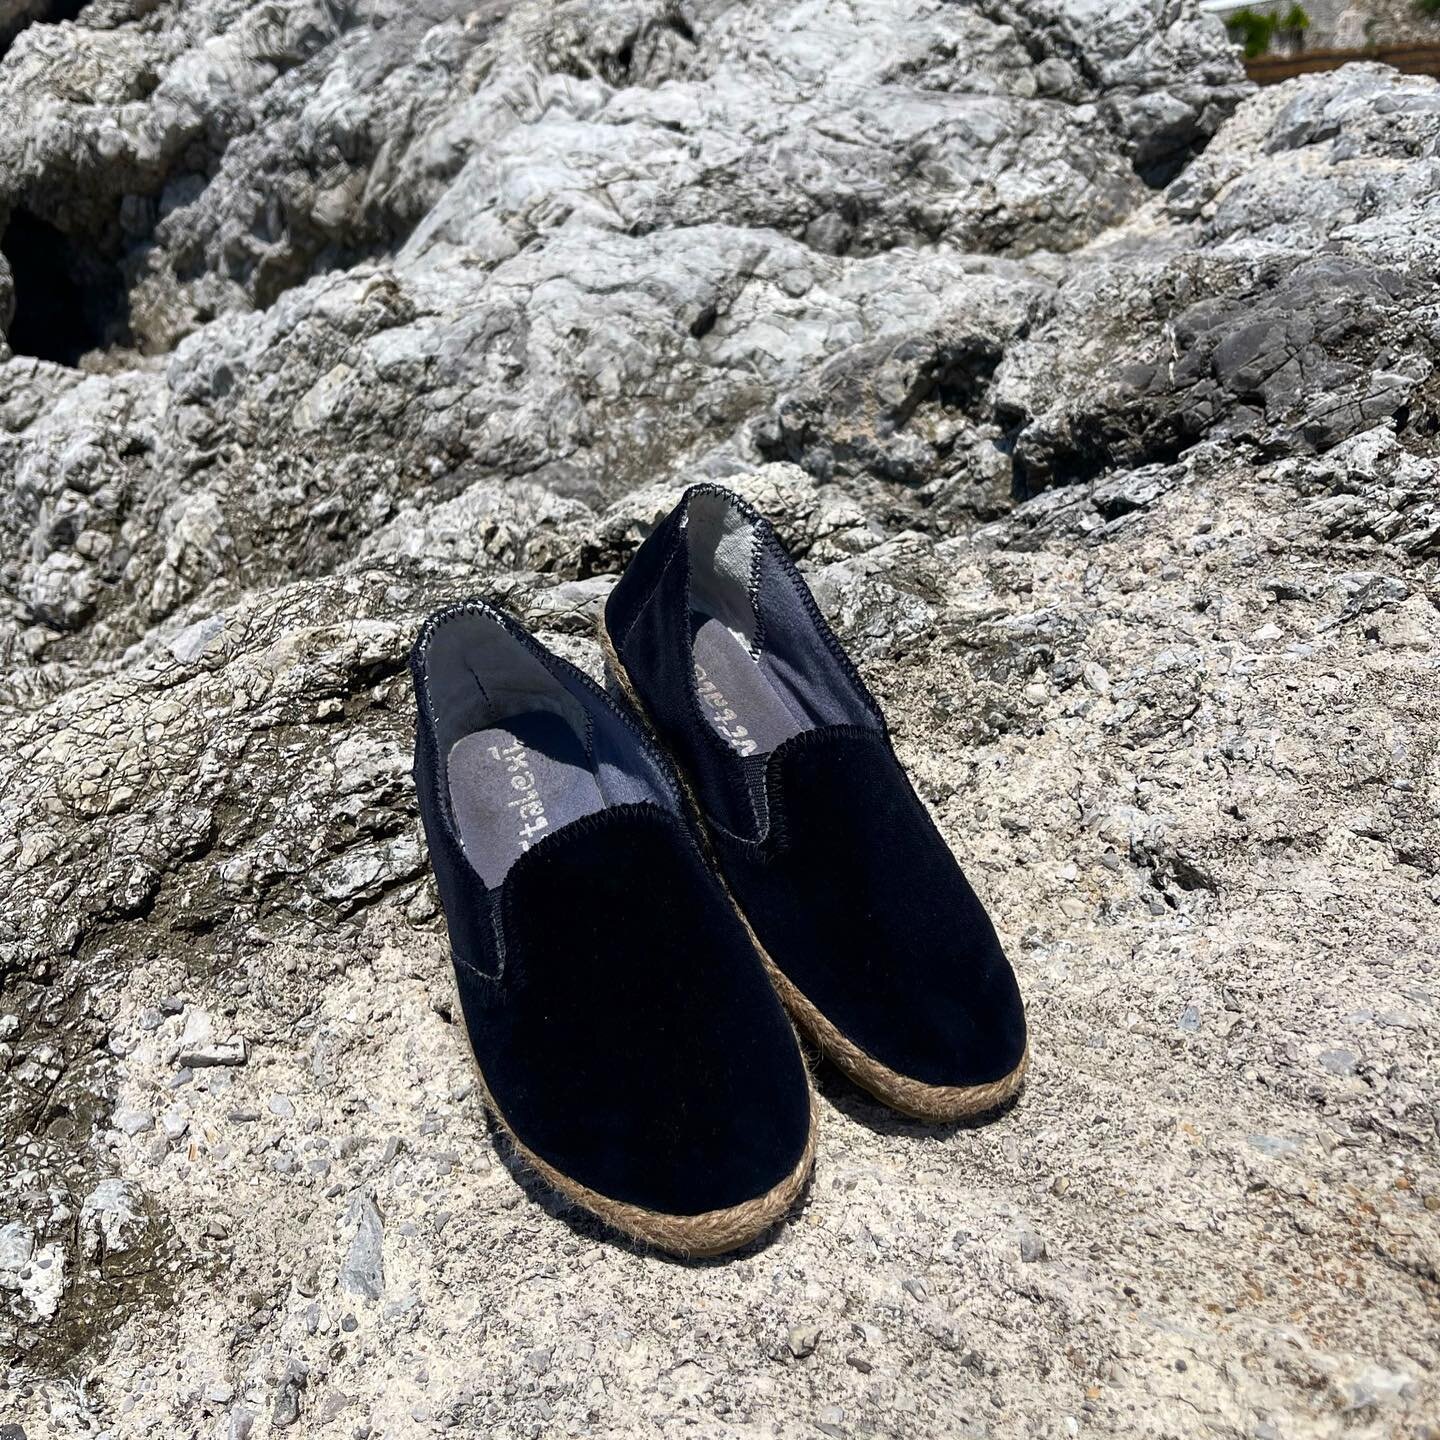 The most perfect espadrille there ever was. Pure comfort. High quality velvet. Sustainable rubber sole &amp; burlap stitching. All handmade. Need we say more?